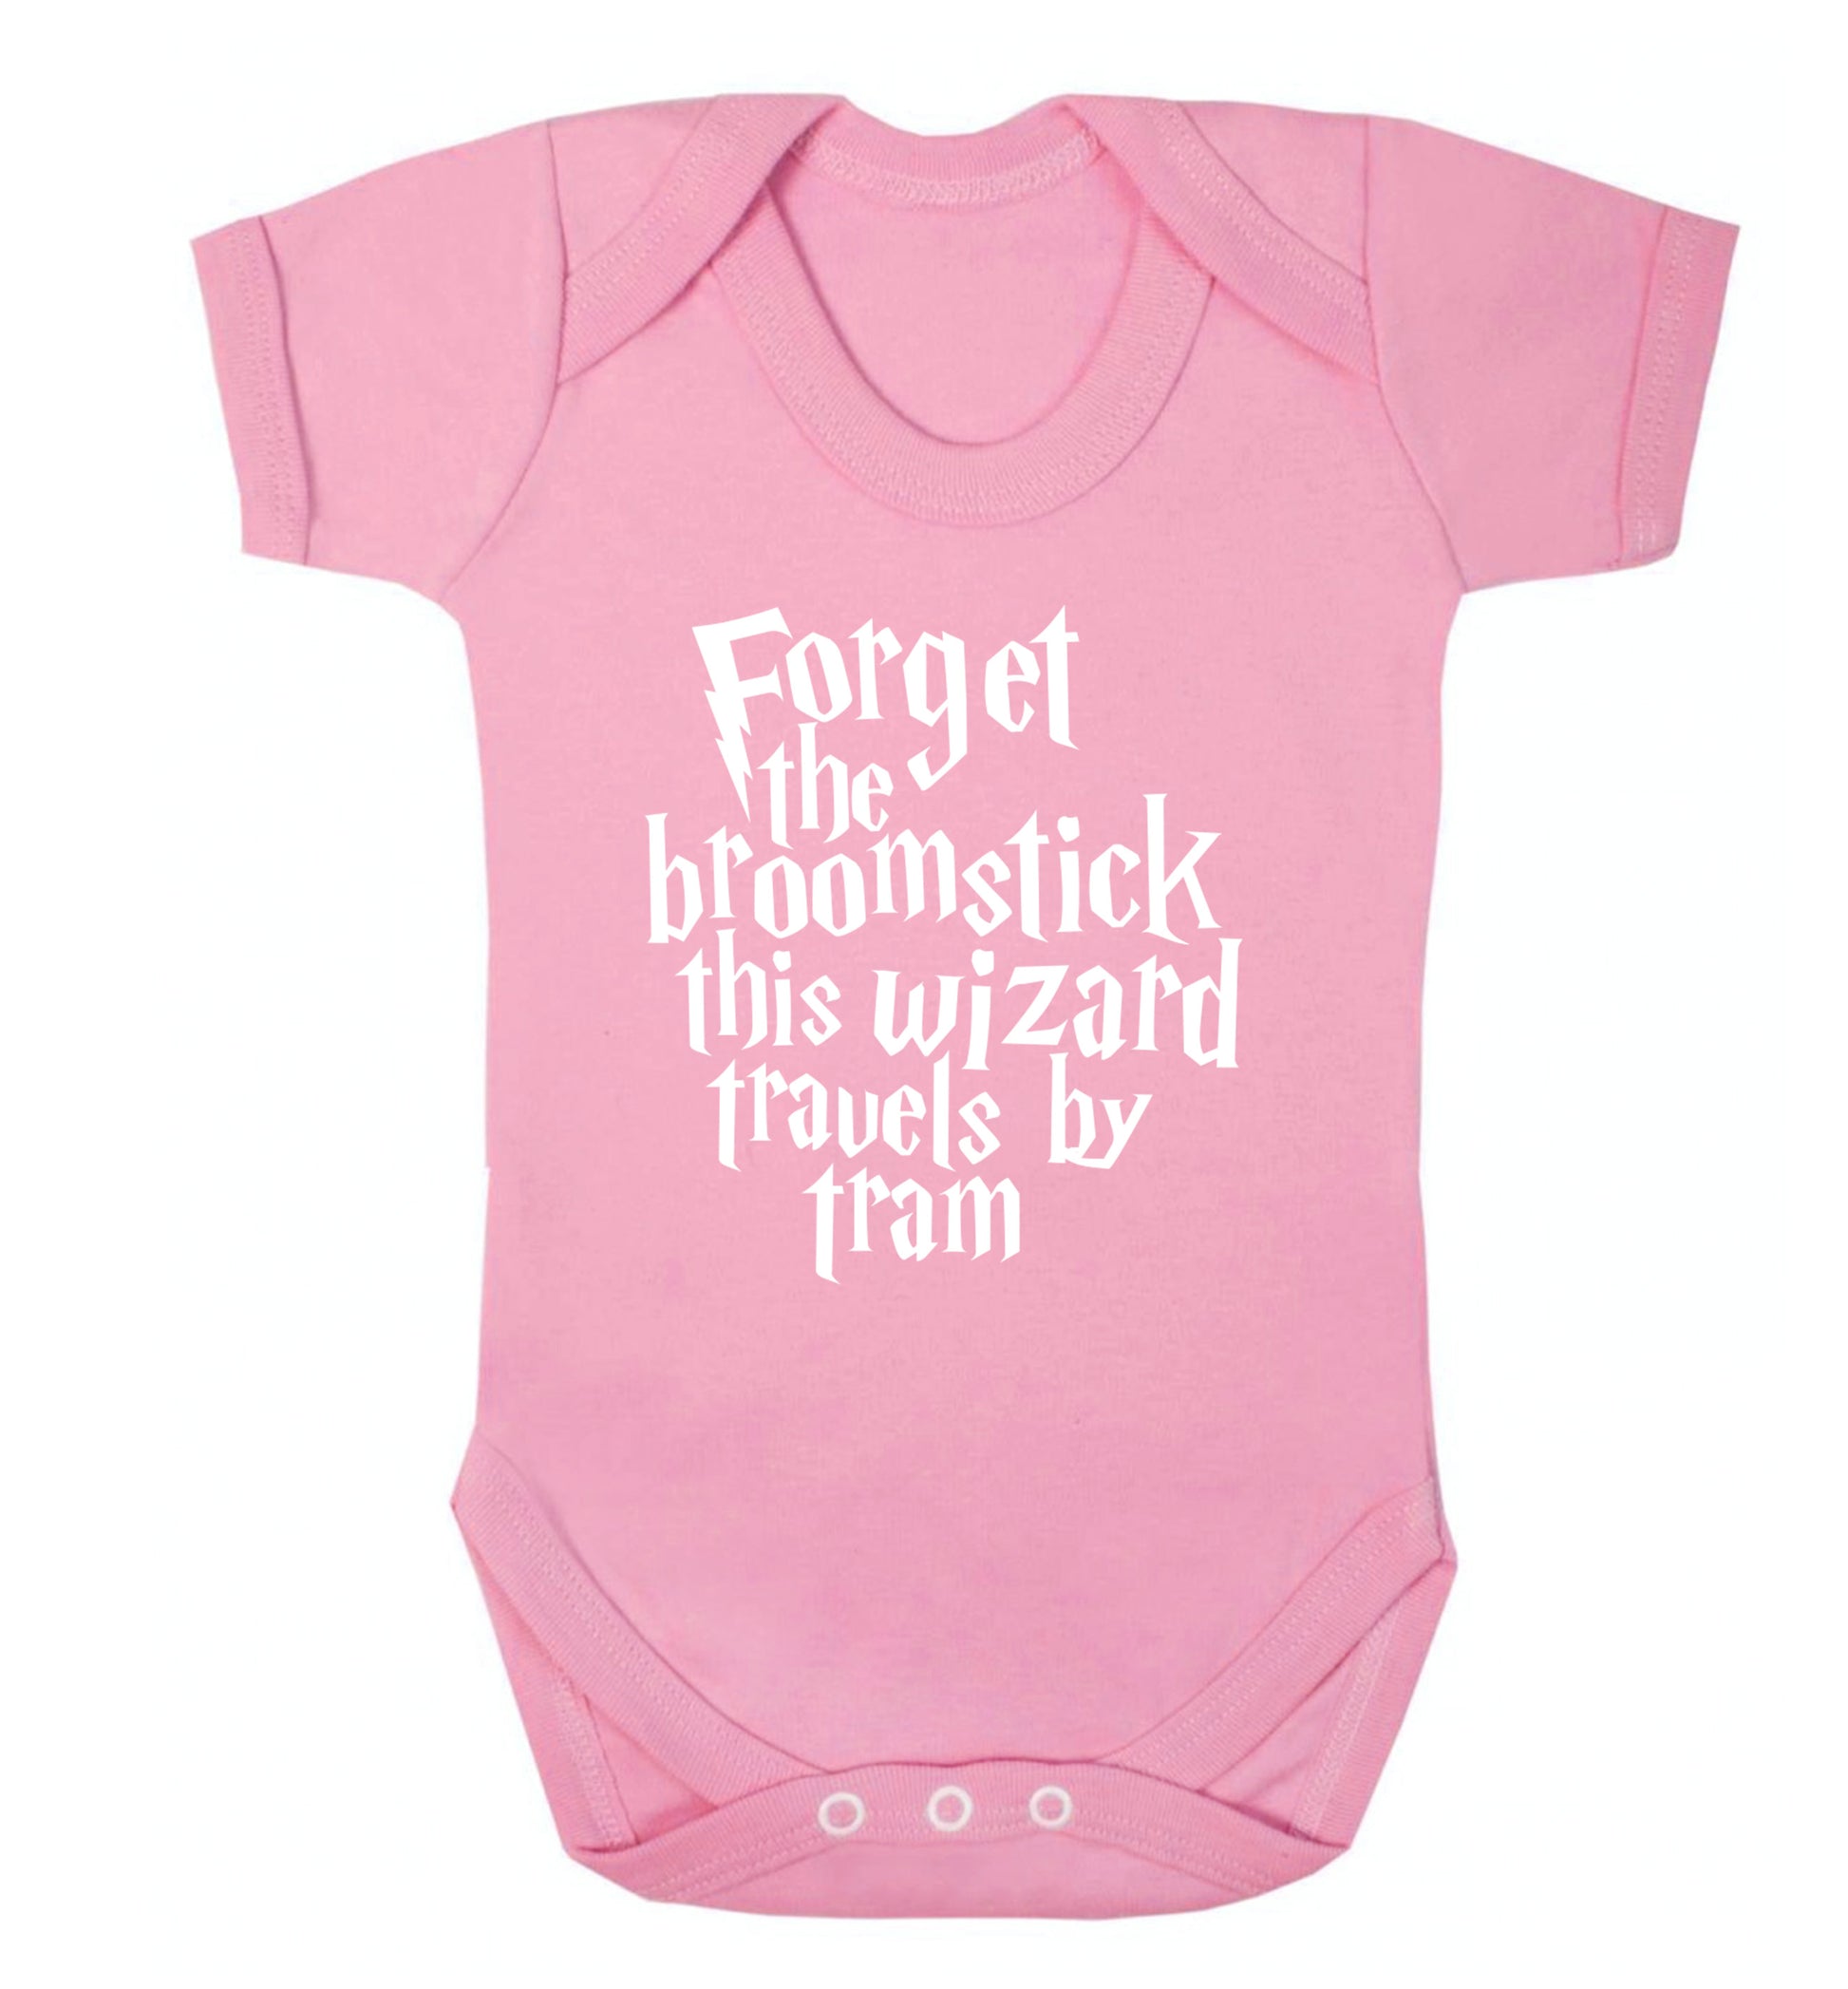 Forget the broomstick this wizard travels by tram Baby Vest pale pink 18-24 months